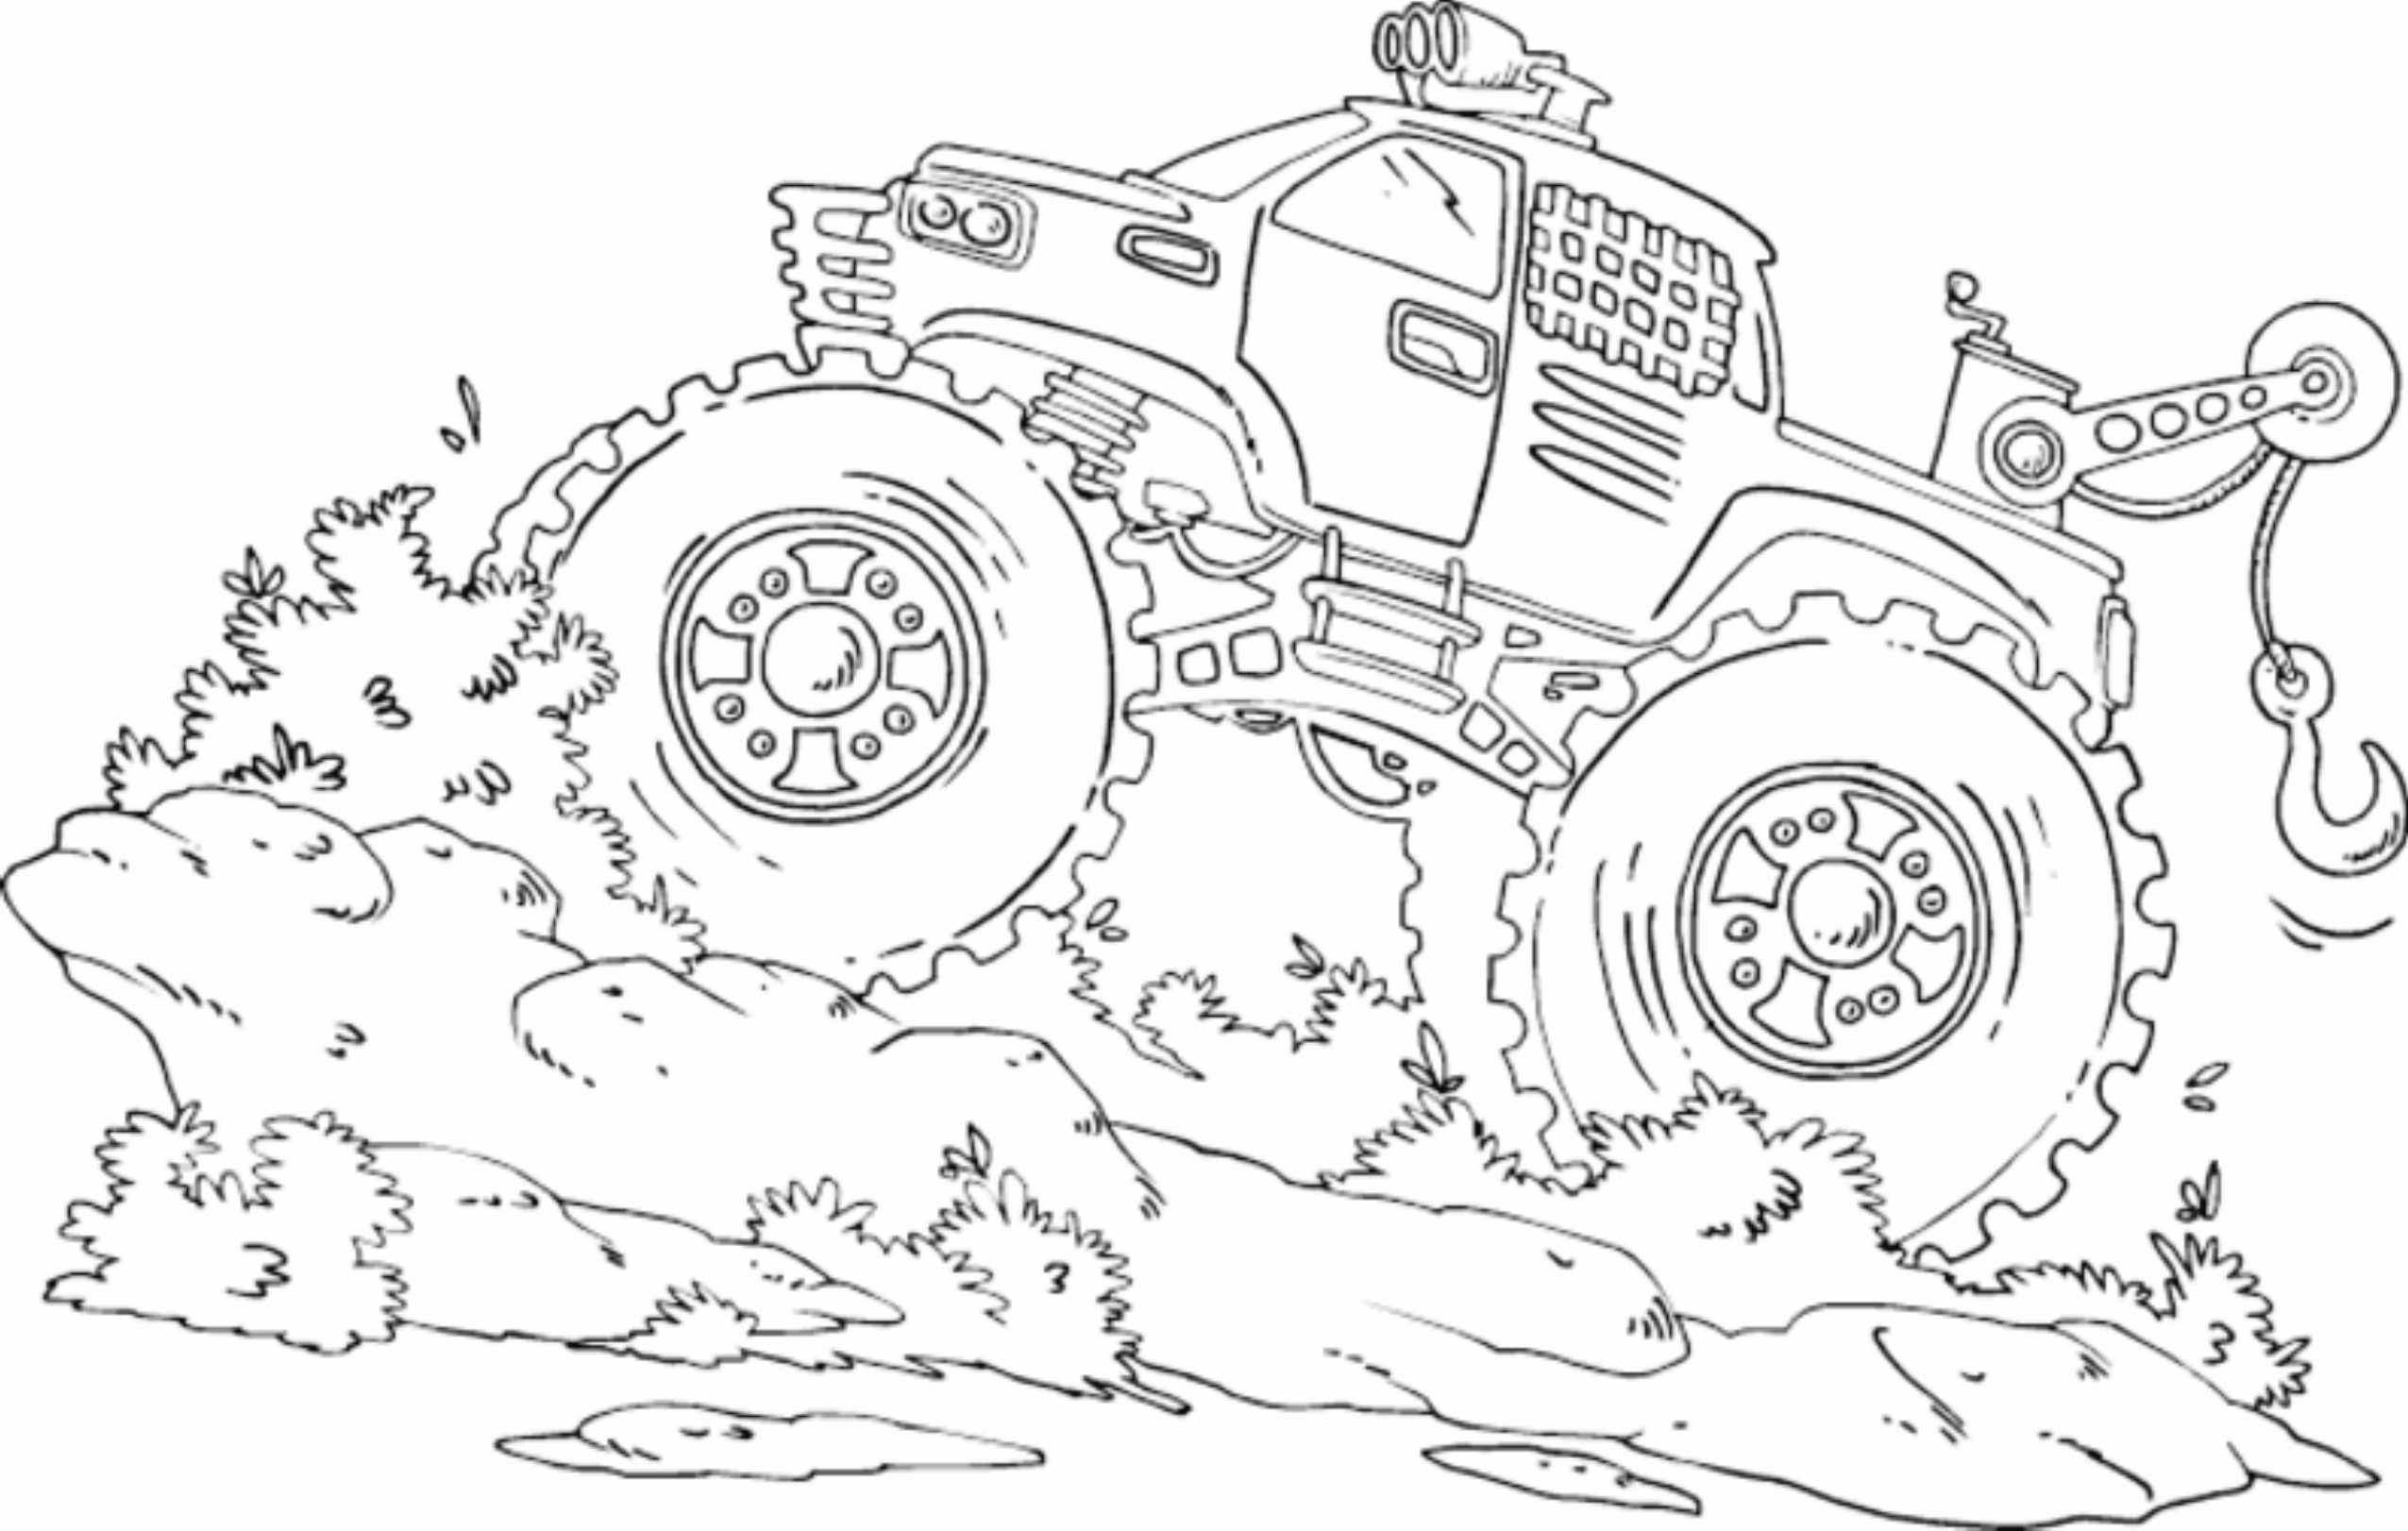 Printable Monster Truck Pictures - Printable Blank World